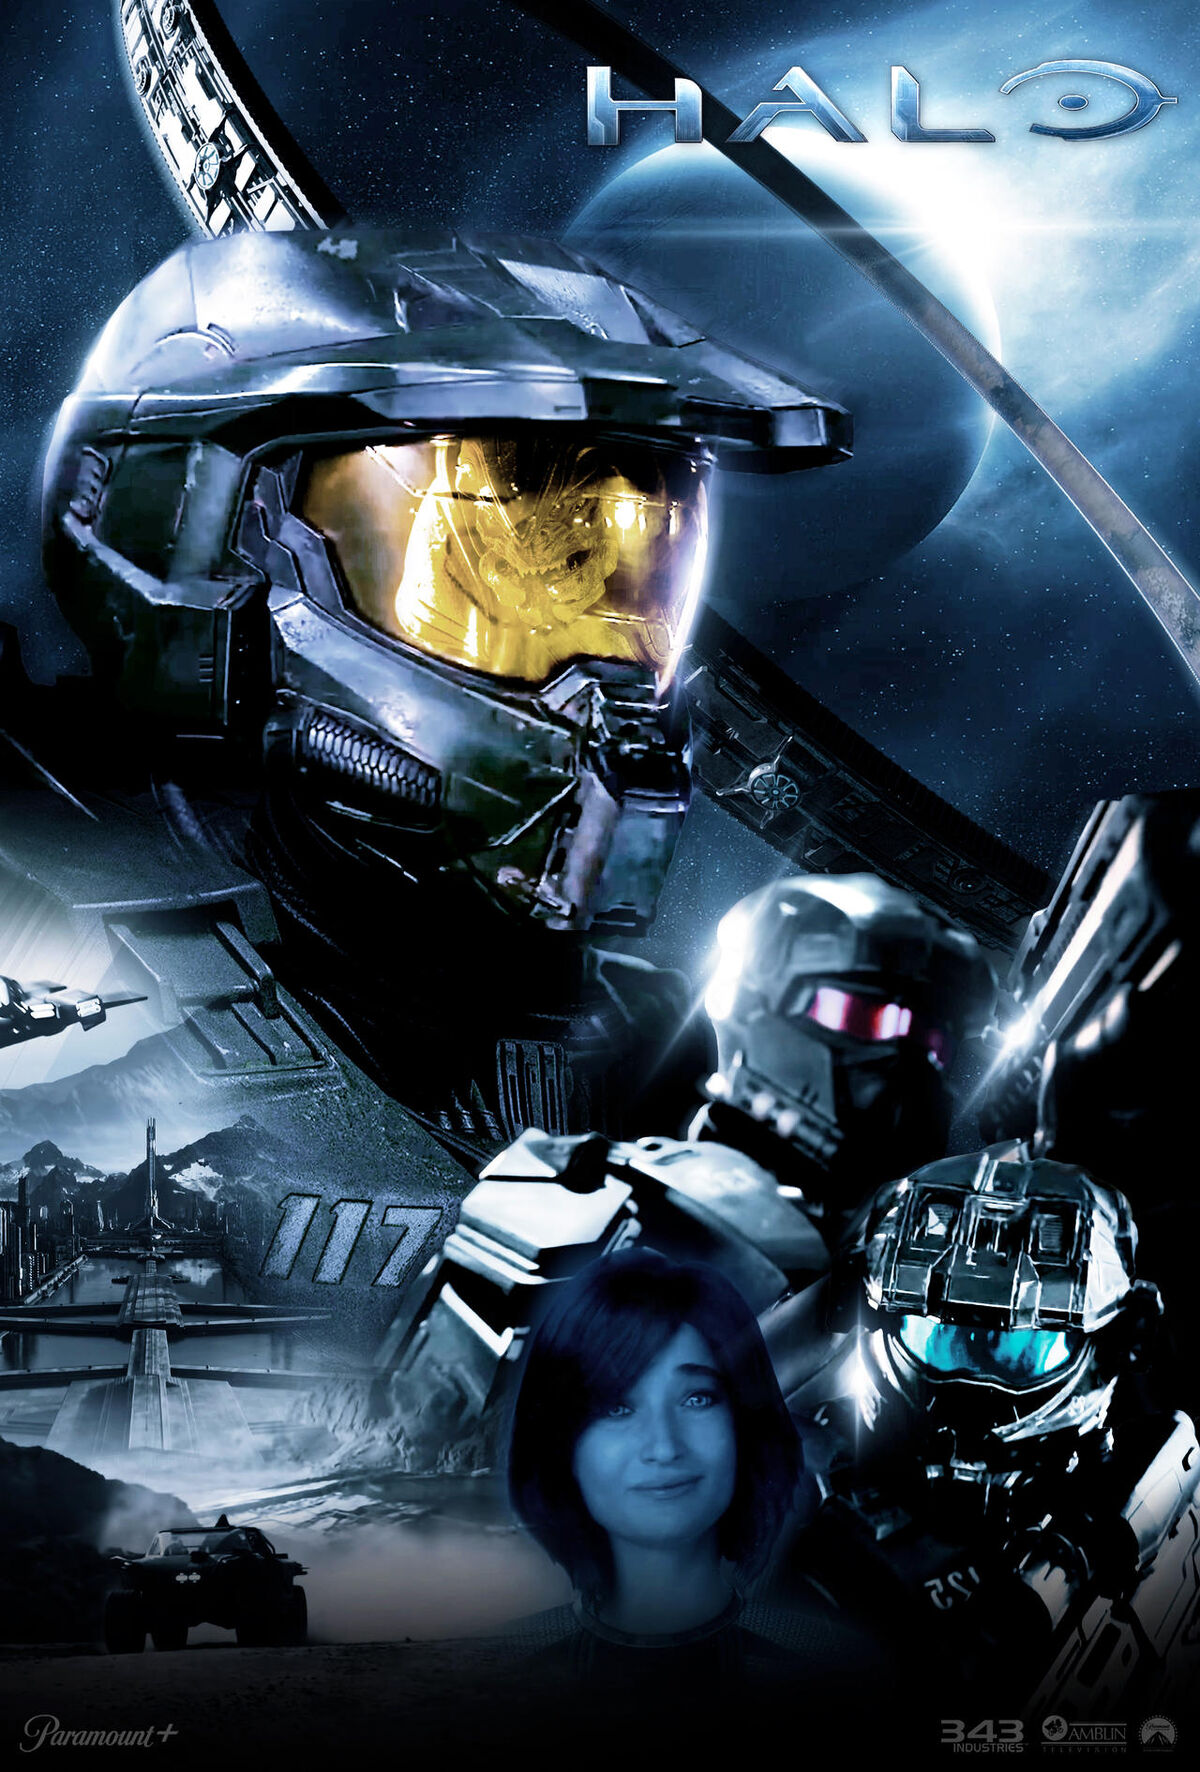 Halo TV Series Set To Premiere On Paramount Plus In 2022